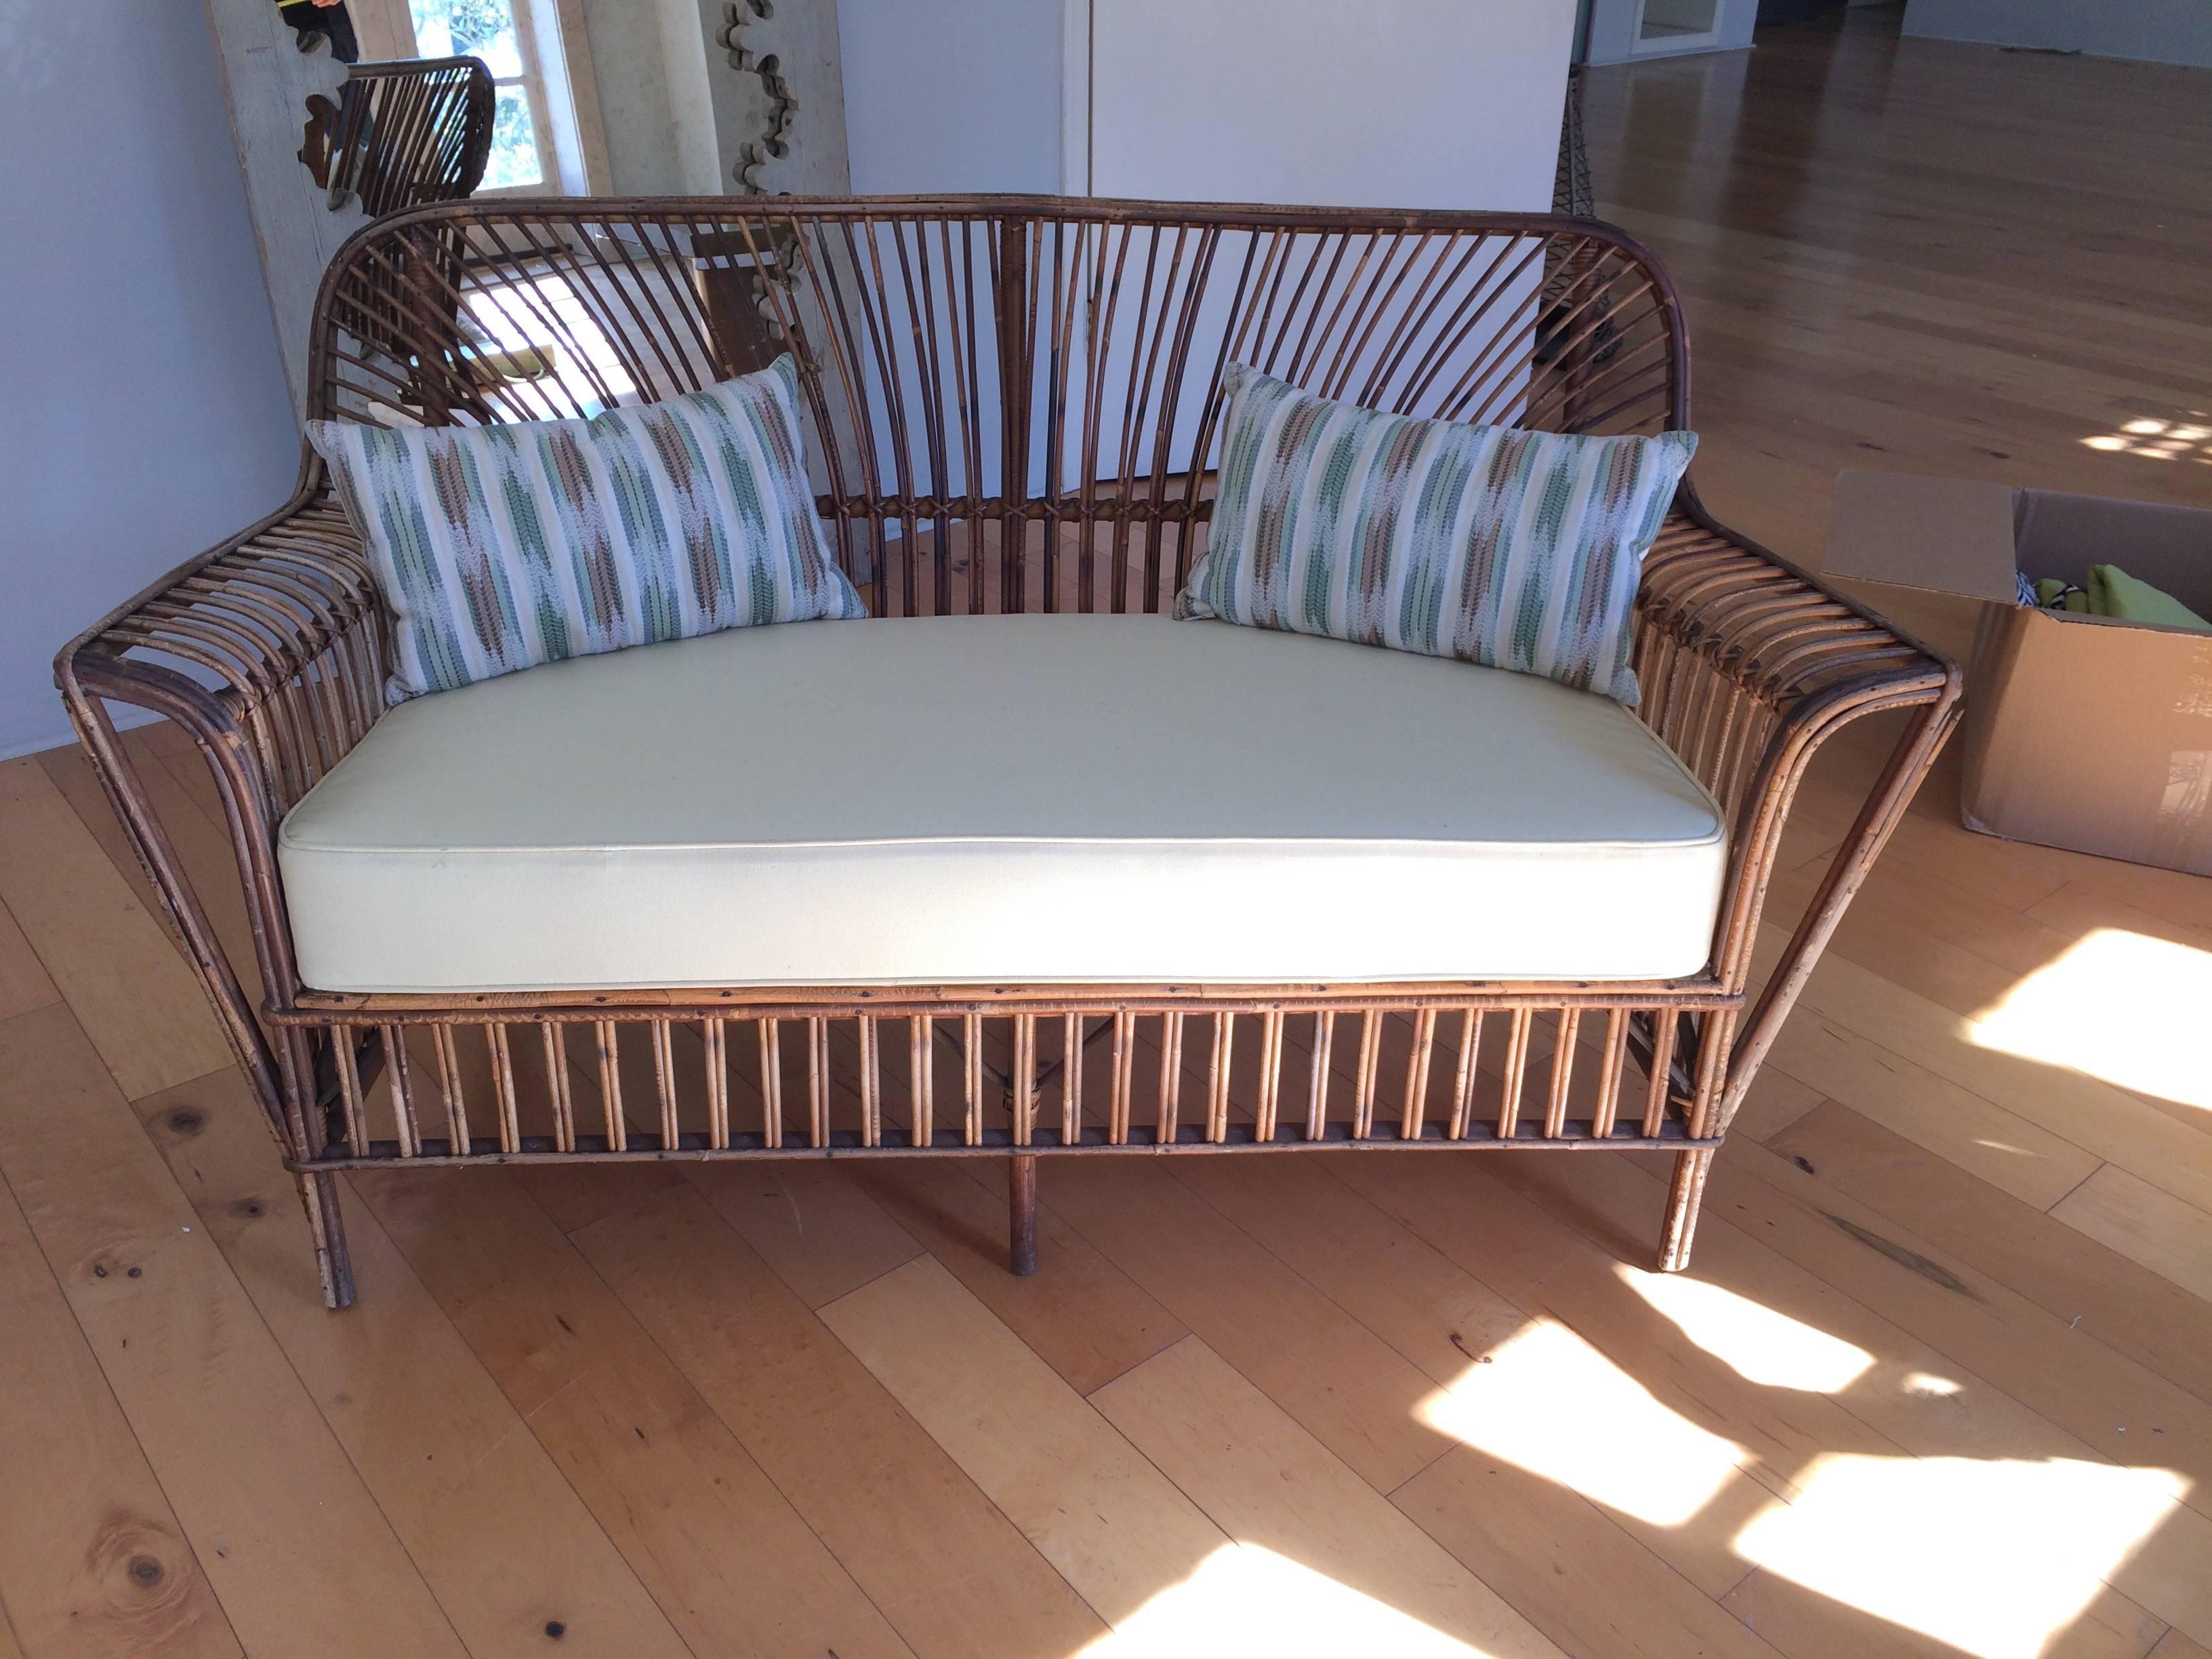 Classic rattan loveseat with lovely curved arms and custom off-white seat cushion and two pillows included. Beautiful front and back. Great for a covered porch or indoors. Seat 18" H 21" D.